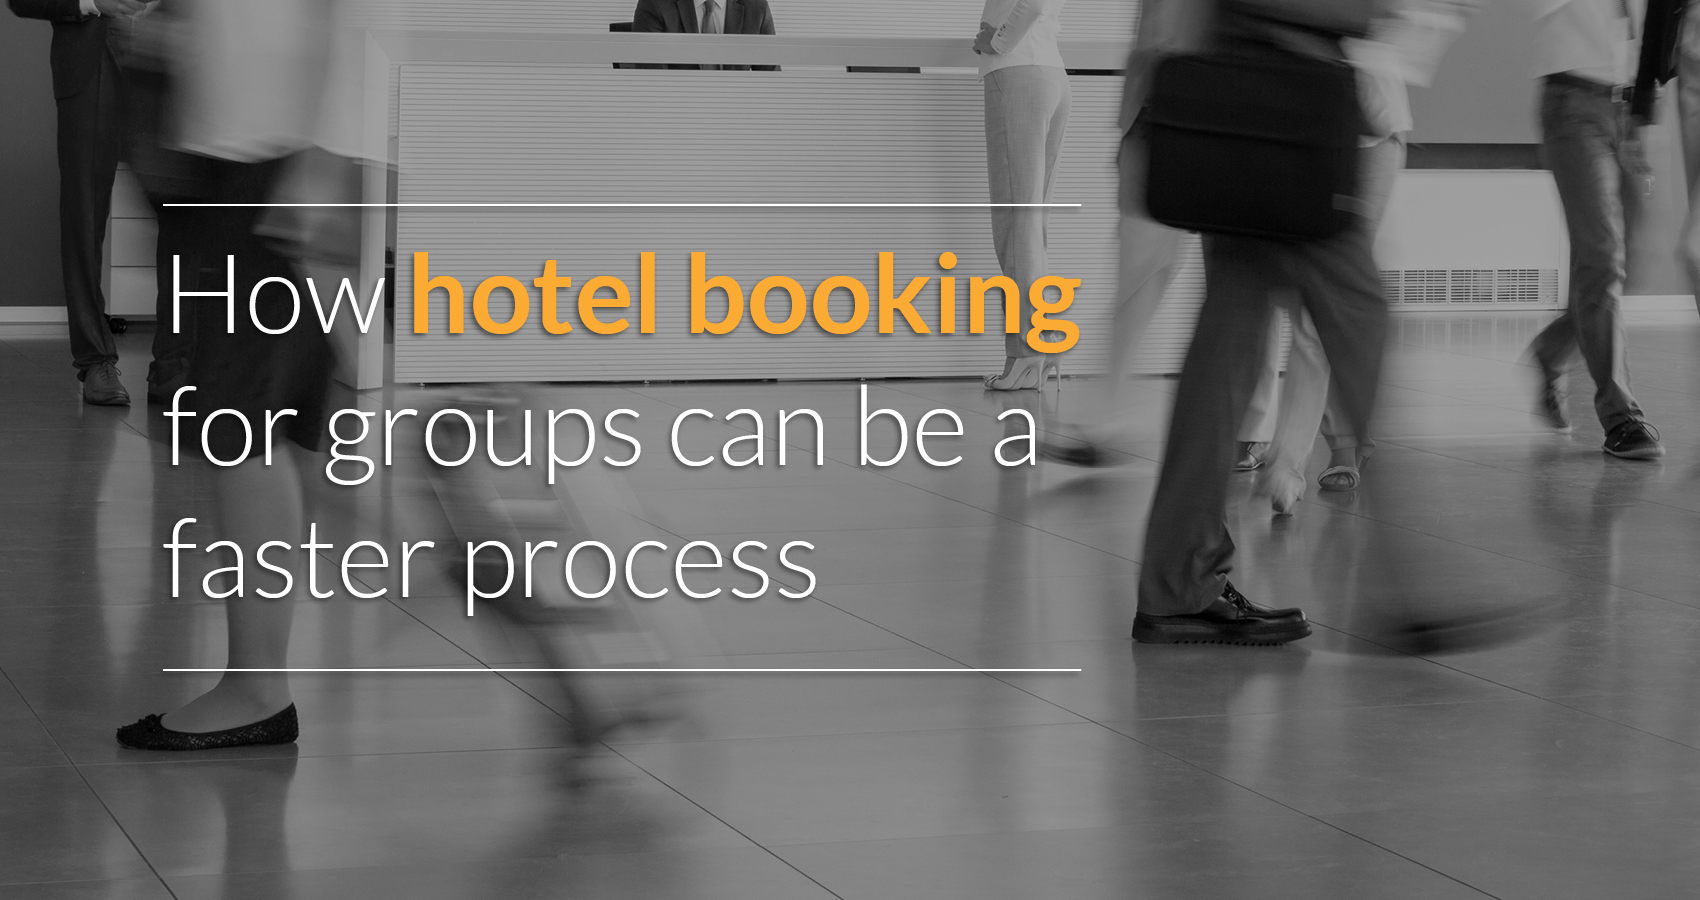 How hotel booking for groups can be a faster process